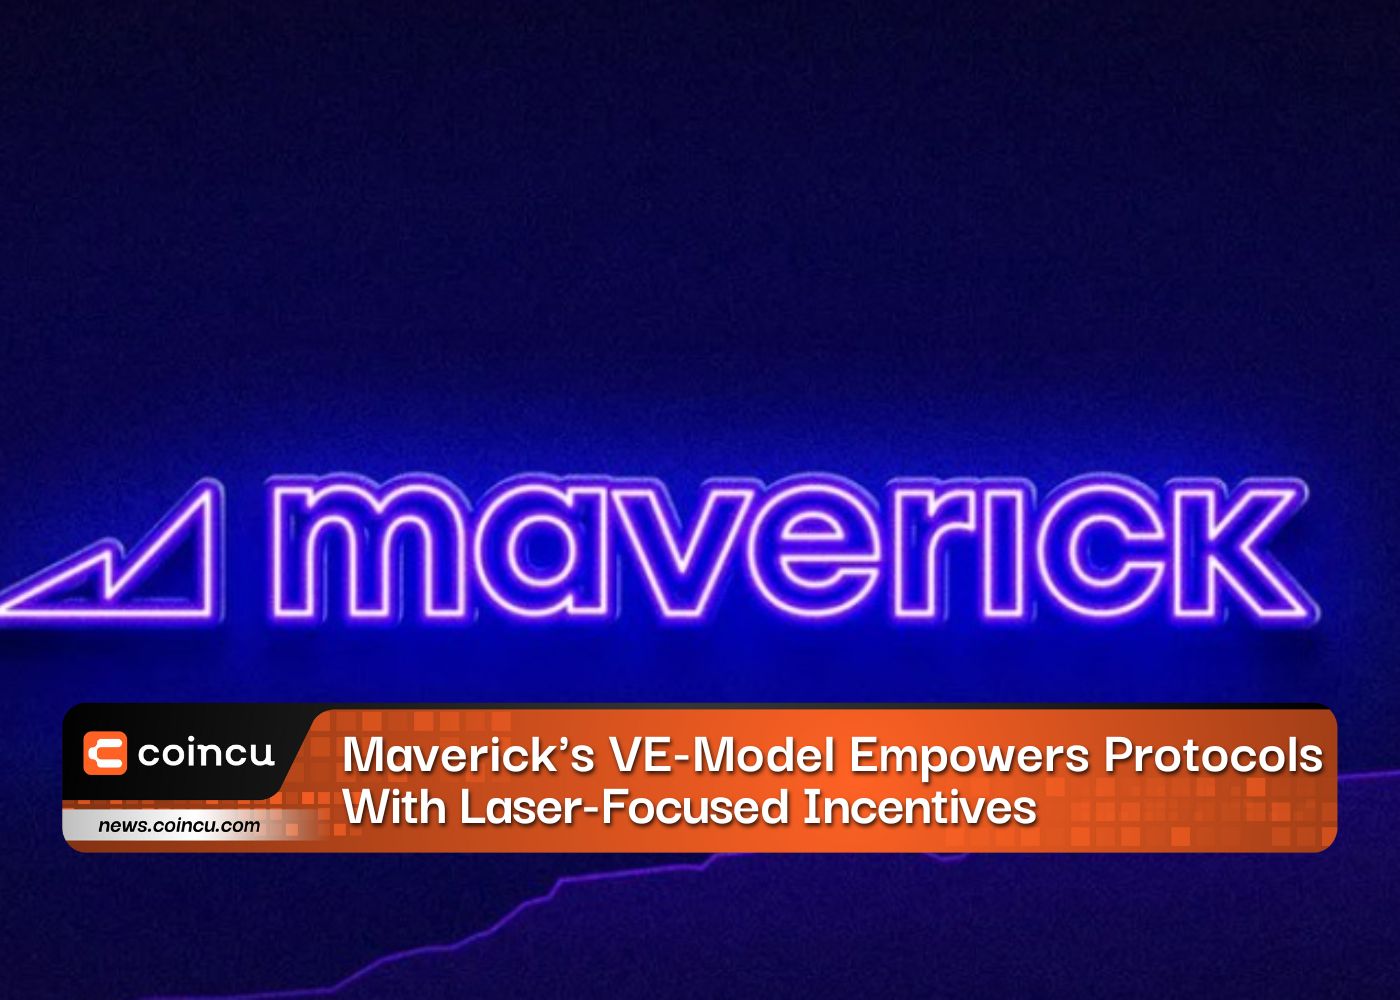 Maverick’s VE-Model Empowers Protocols With Laser-Focused Incentives